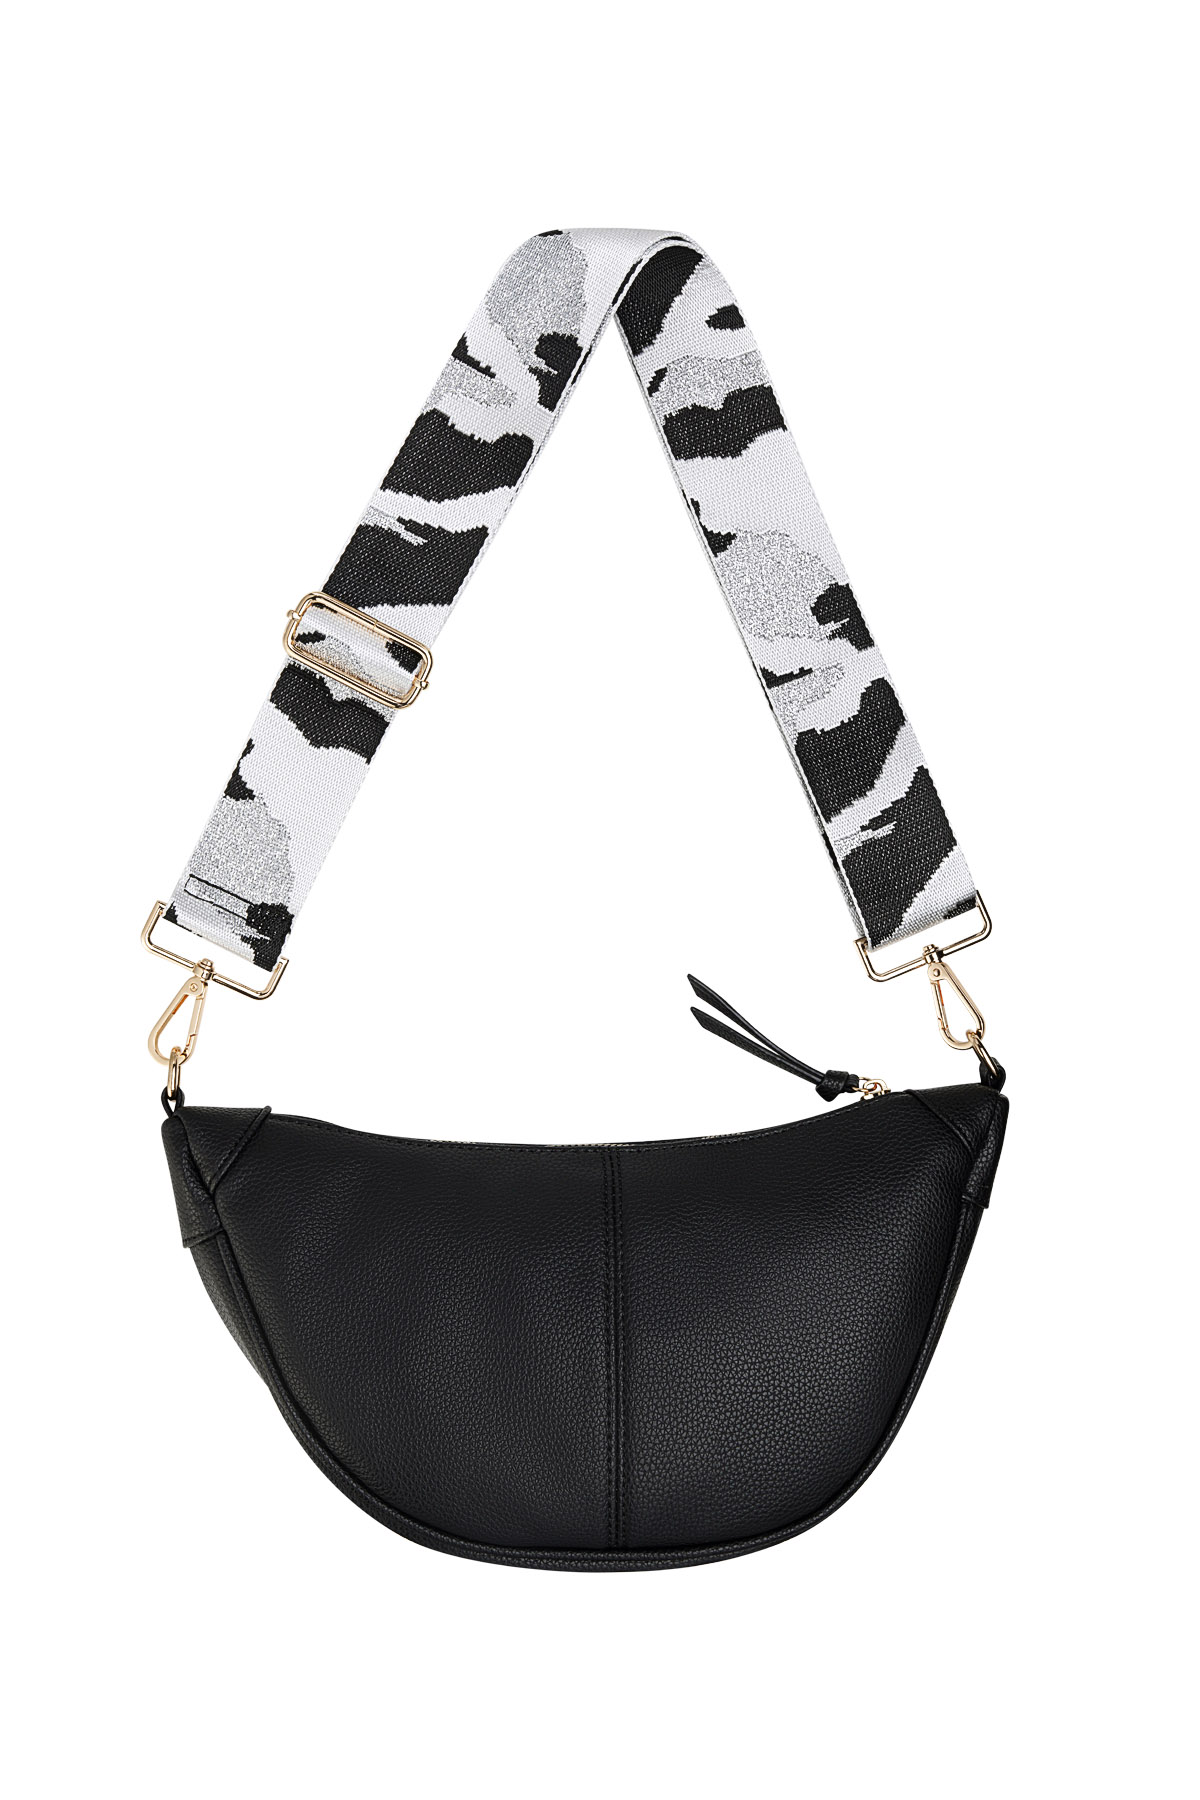 Pouch bag with summer strap - black